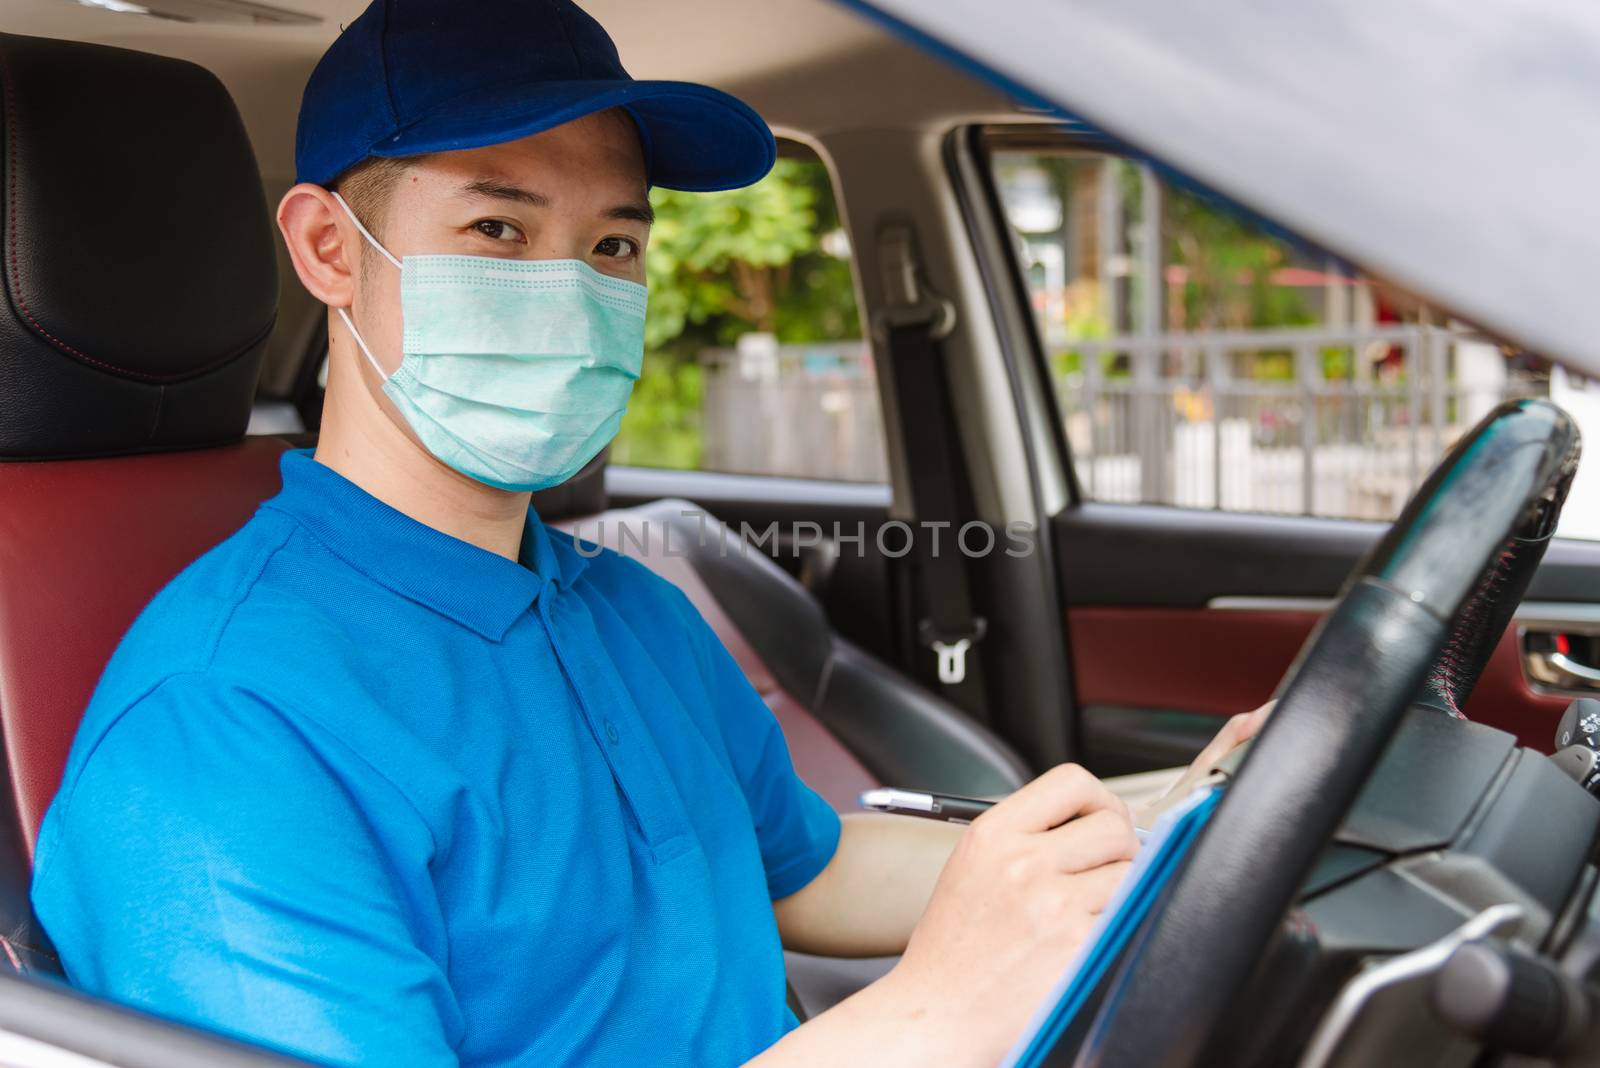 Asian delivery courier young man driver inside the van car with parcel post boxes checking amount he protective face mask, under curfew quarantine pandemic coronavirus COVID-19